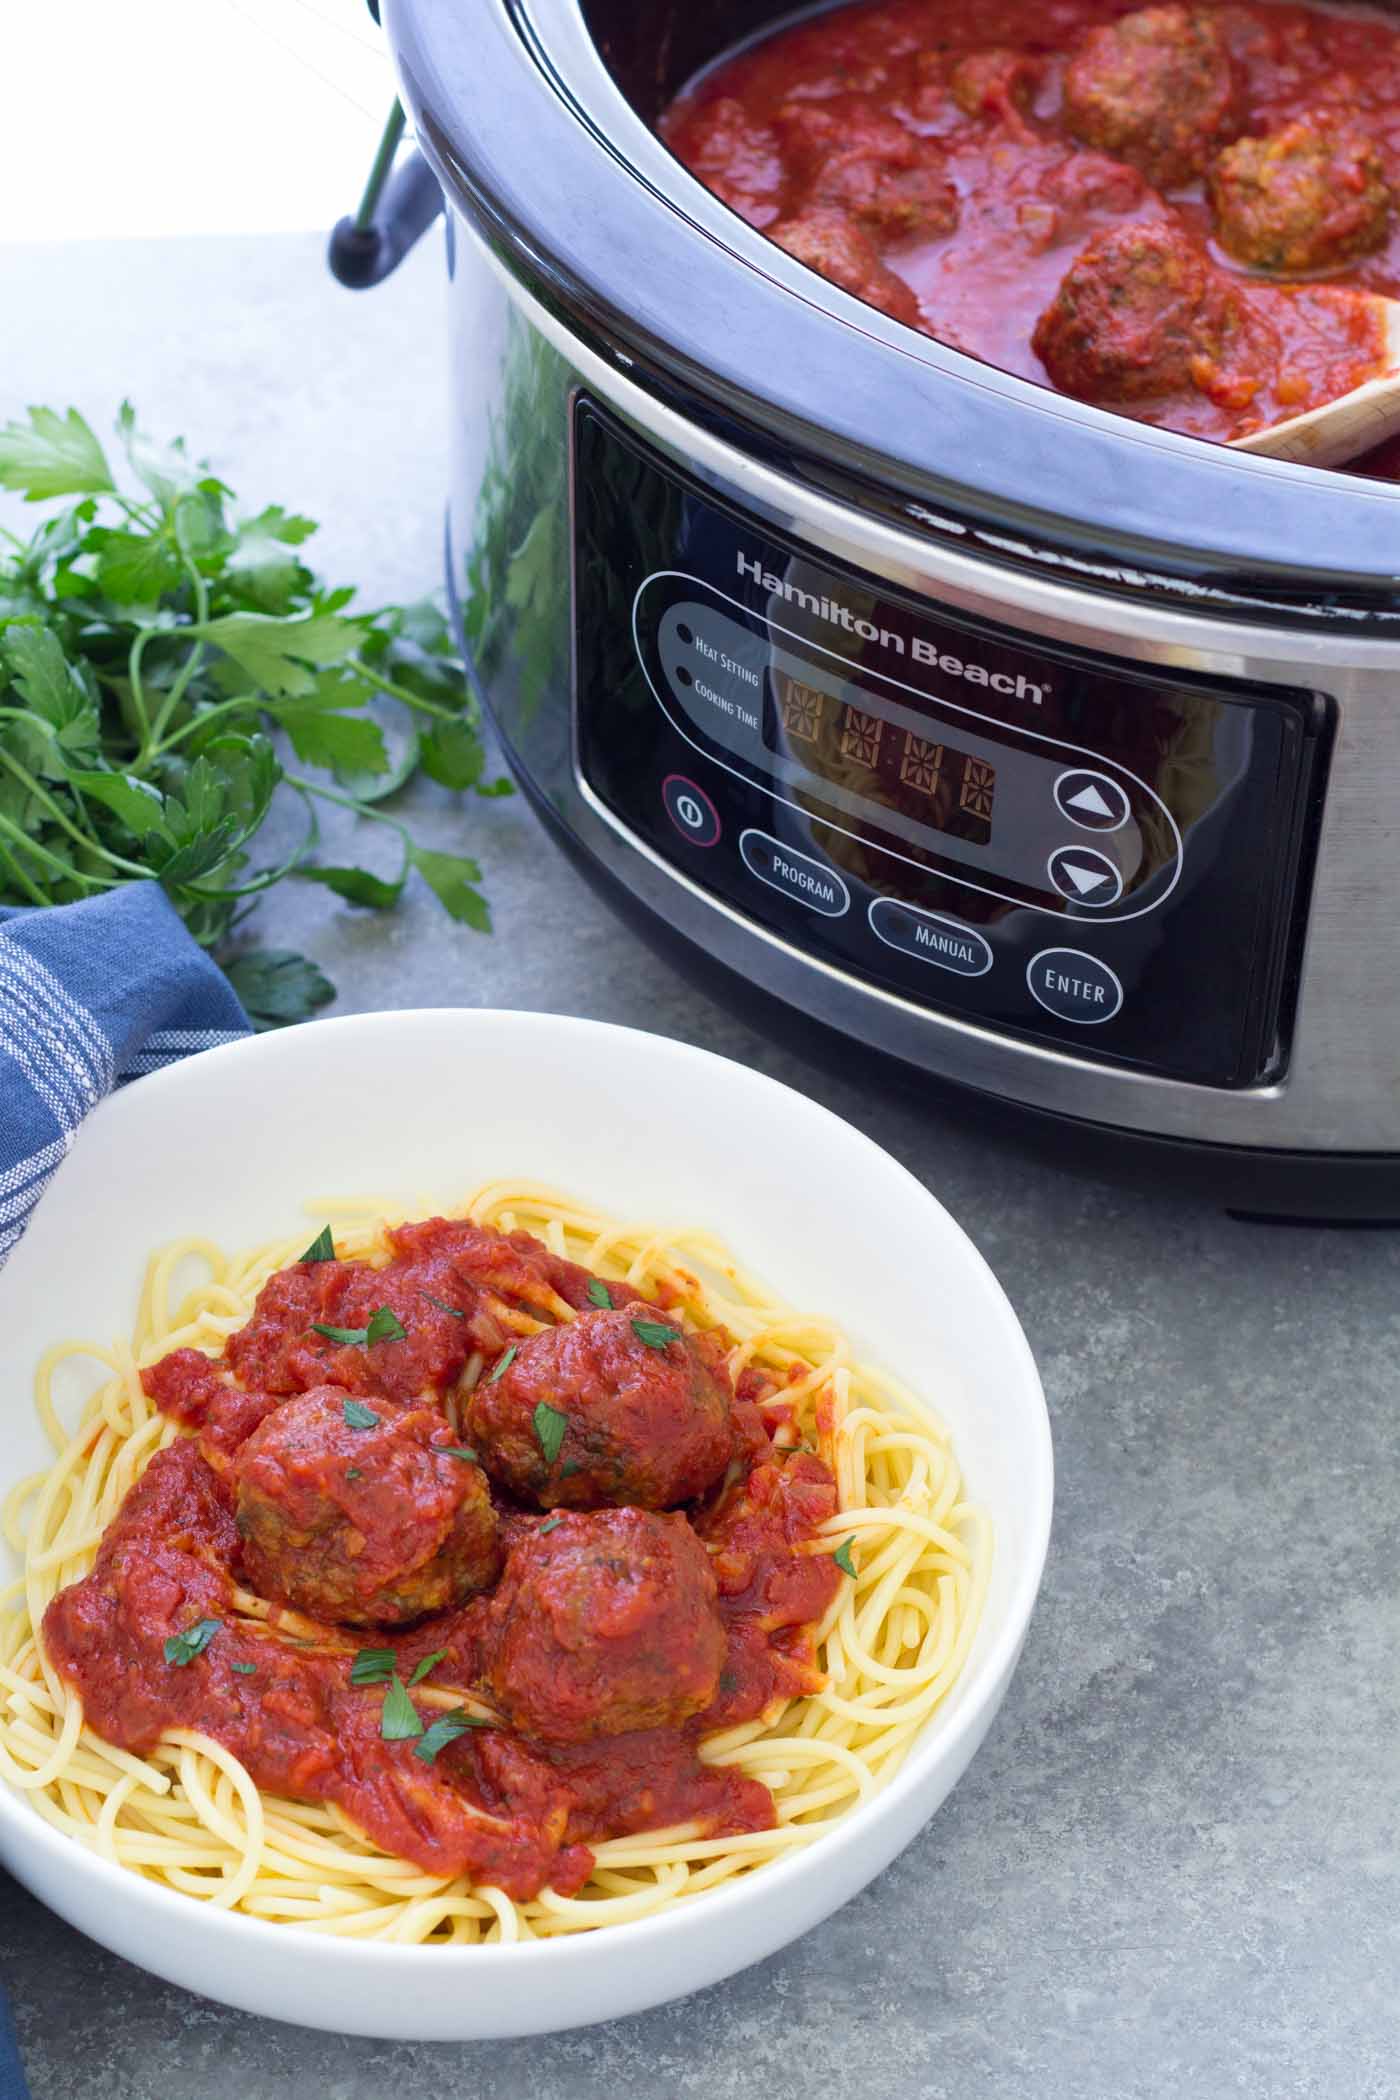 Crockpot meatballs served over spaghetti with slow cooker in the background.